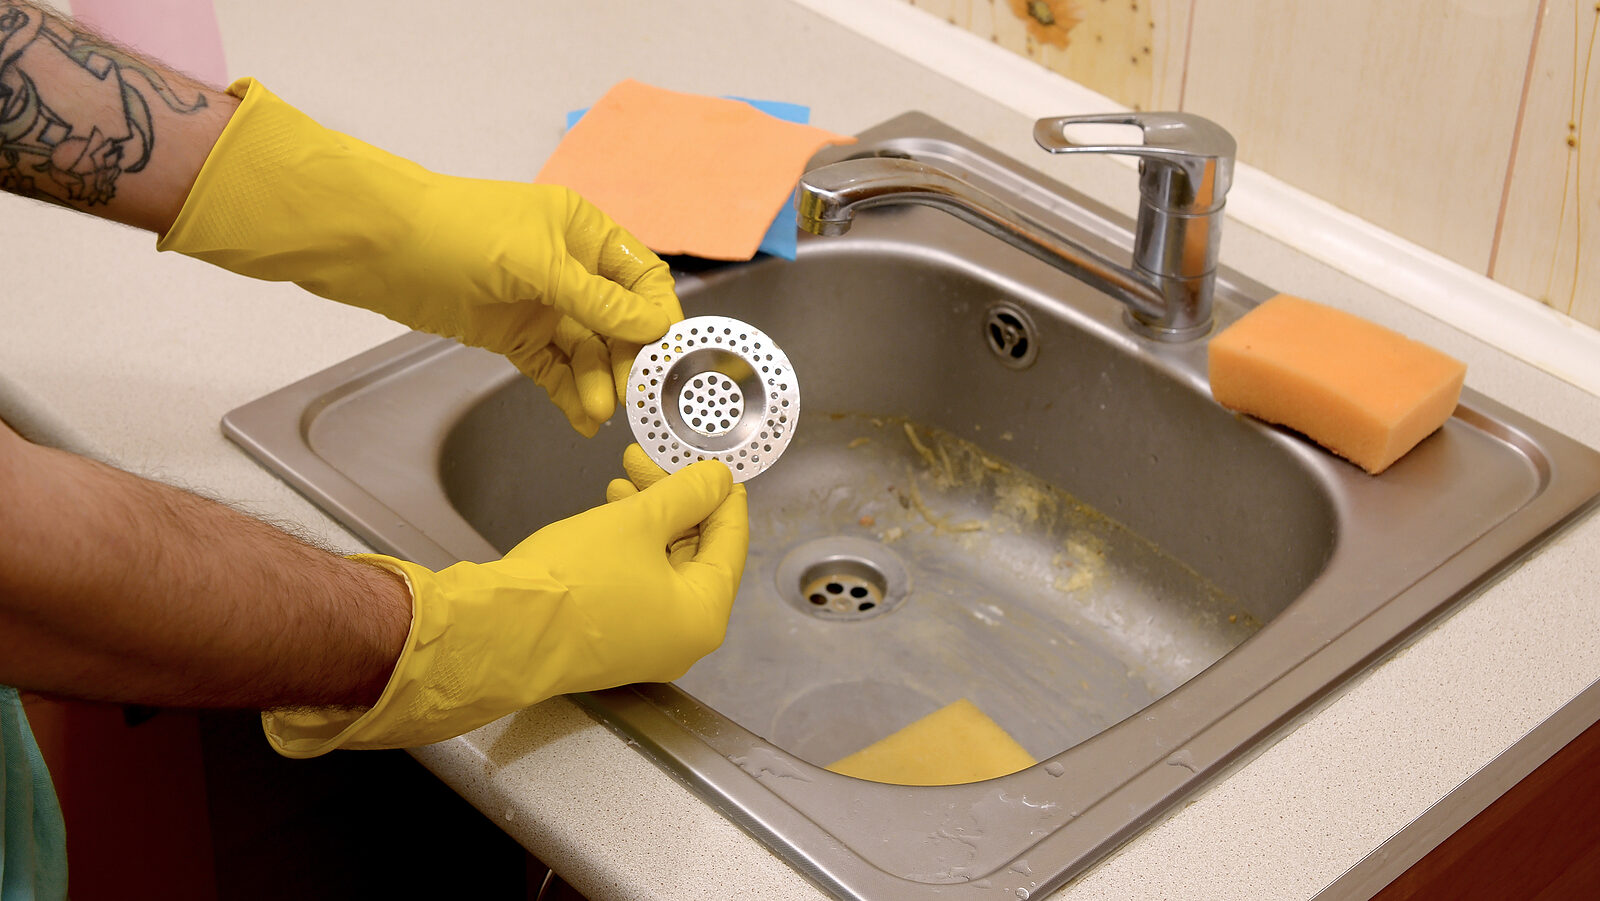 Kitchen sink stinks are not only unpleasant but can also be indicative of underlying issues that need addressing.